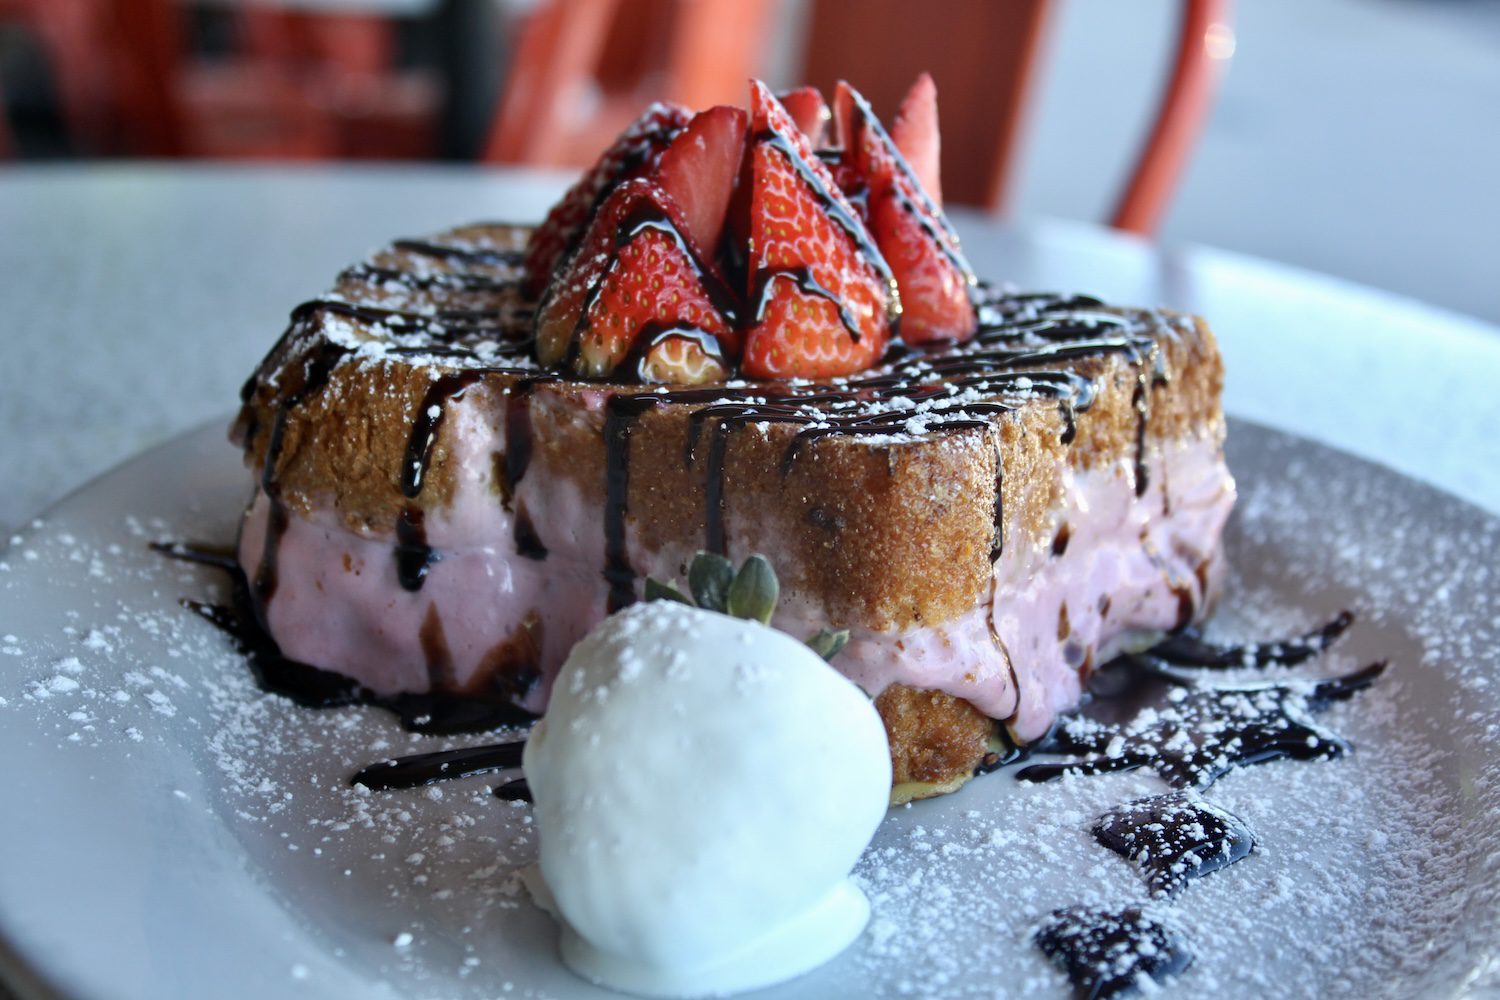 Chocolate Strawberry Stuffed French Toast on a plate with a white chocolate covered strawberry on the side.